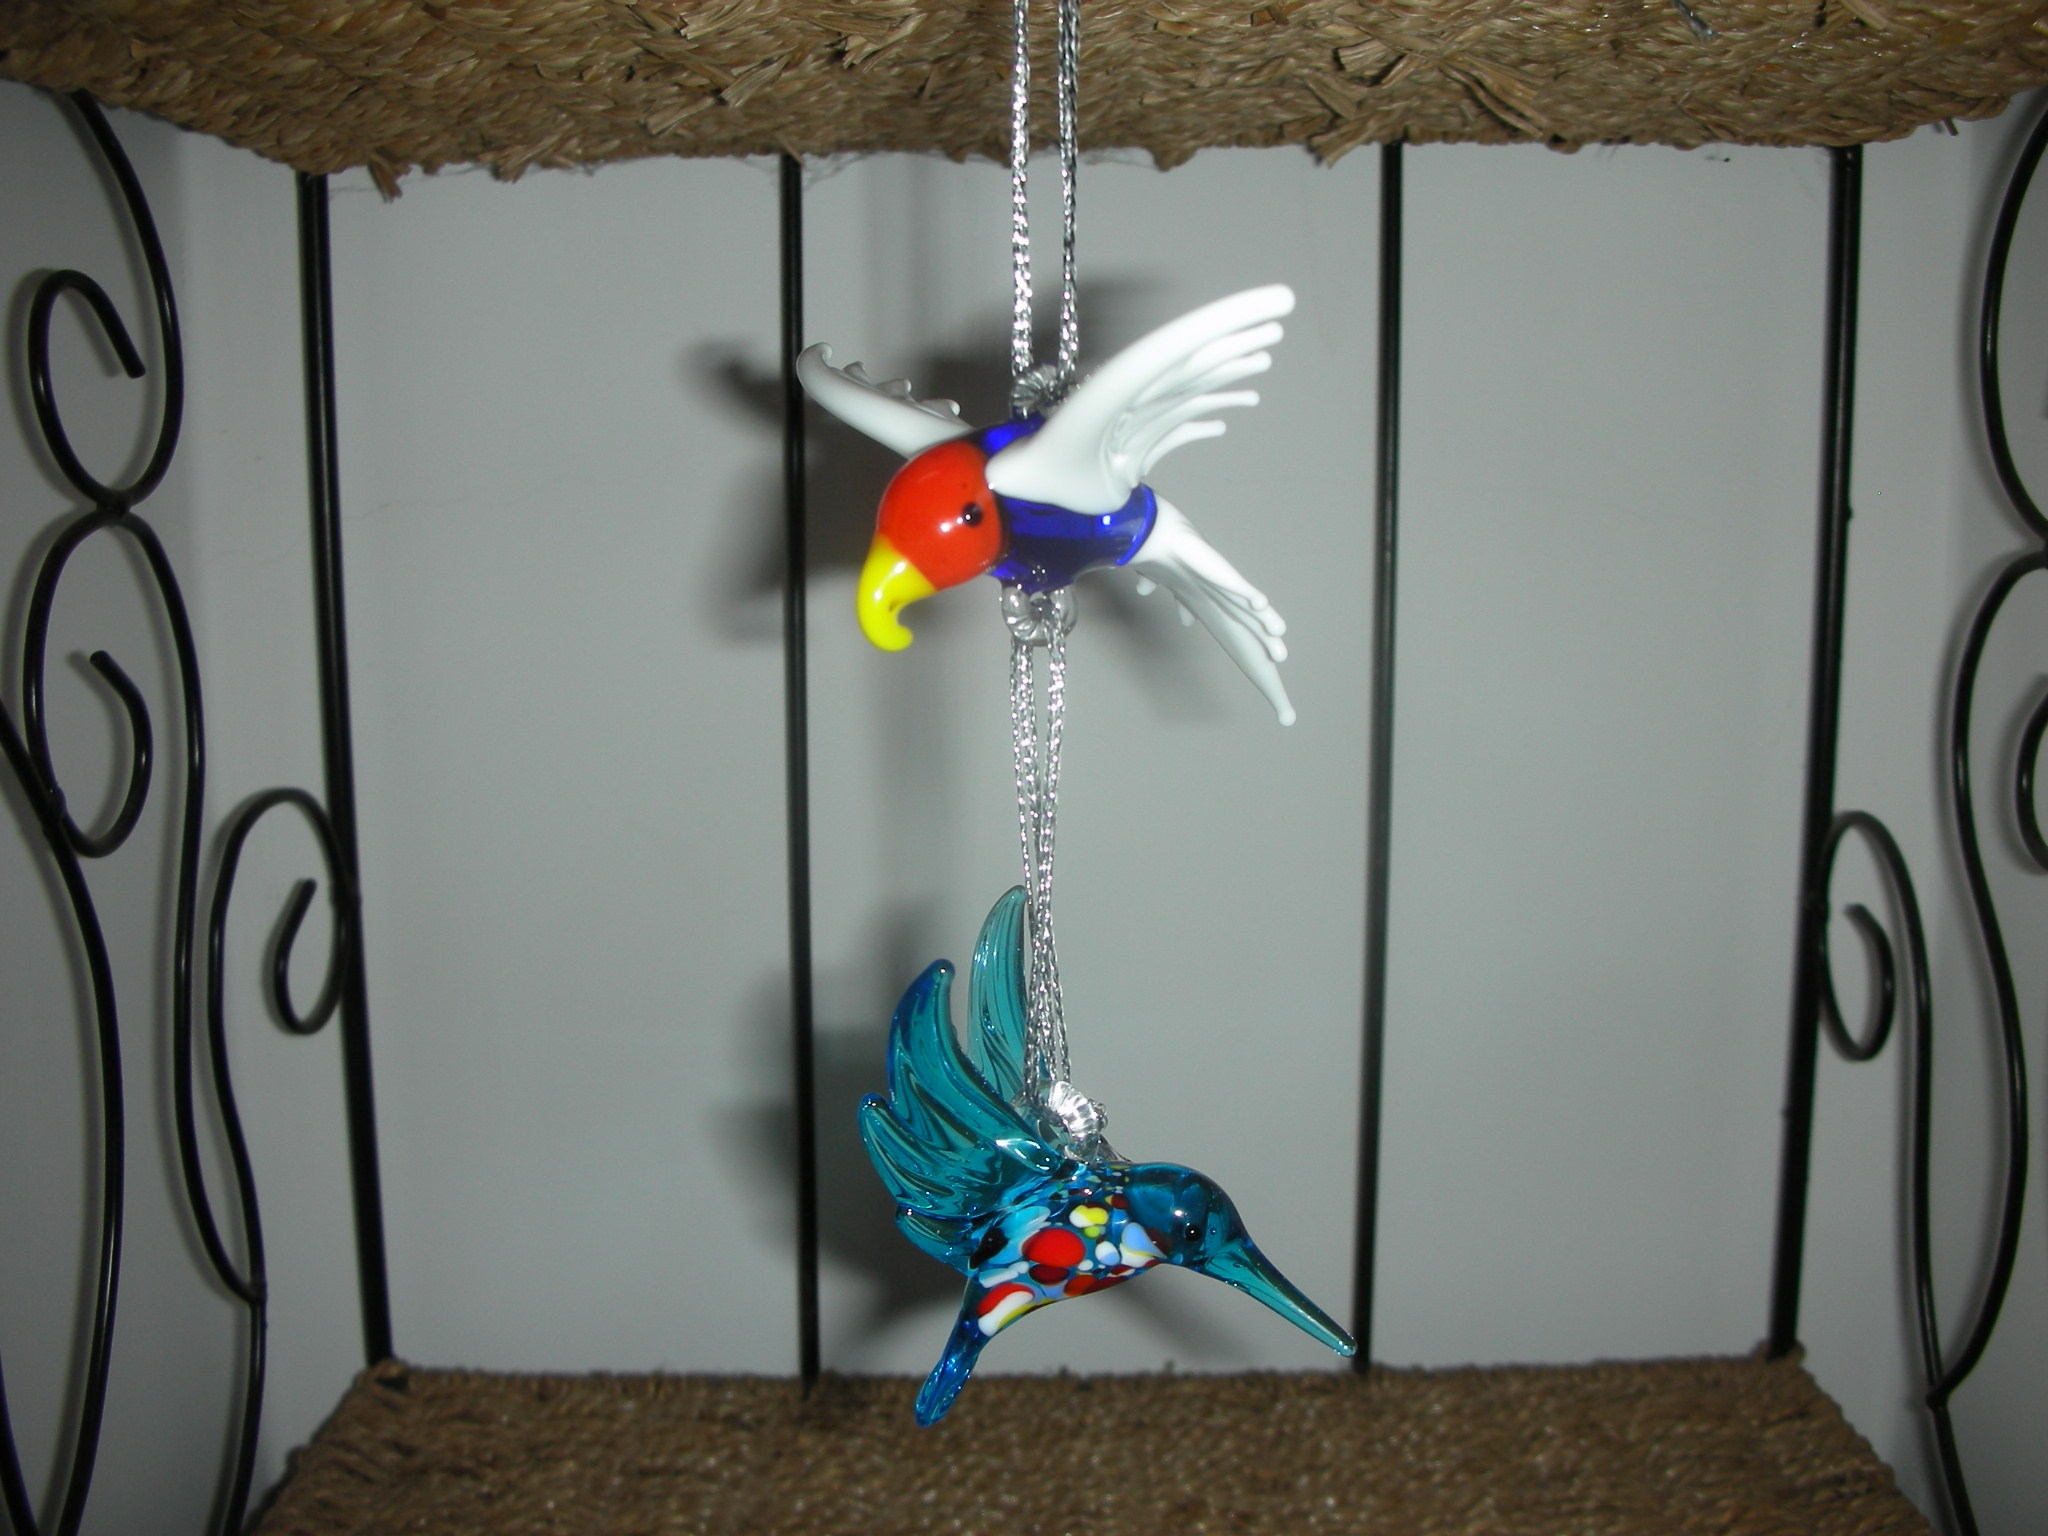 fun gift: poker, memo clip, pendant, jar, wind bell.all made of glass